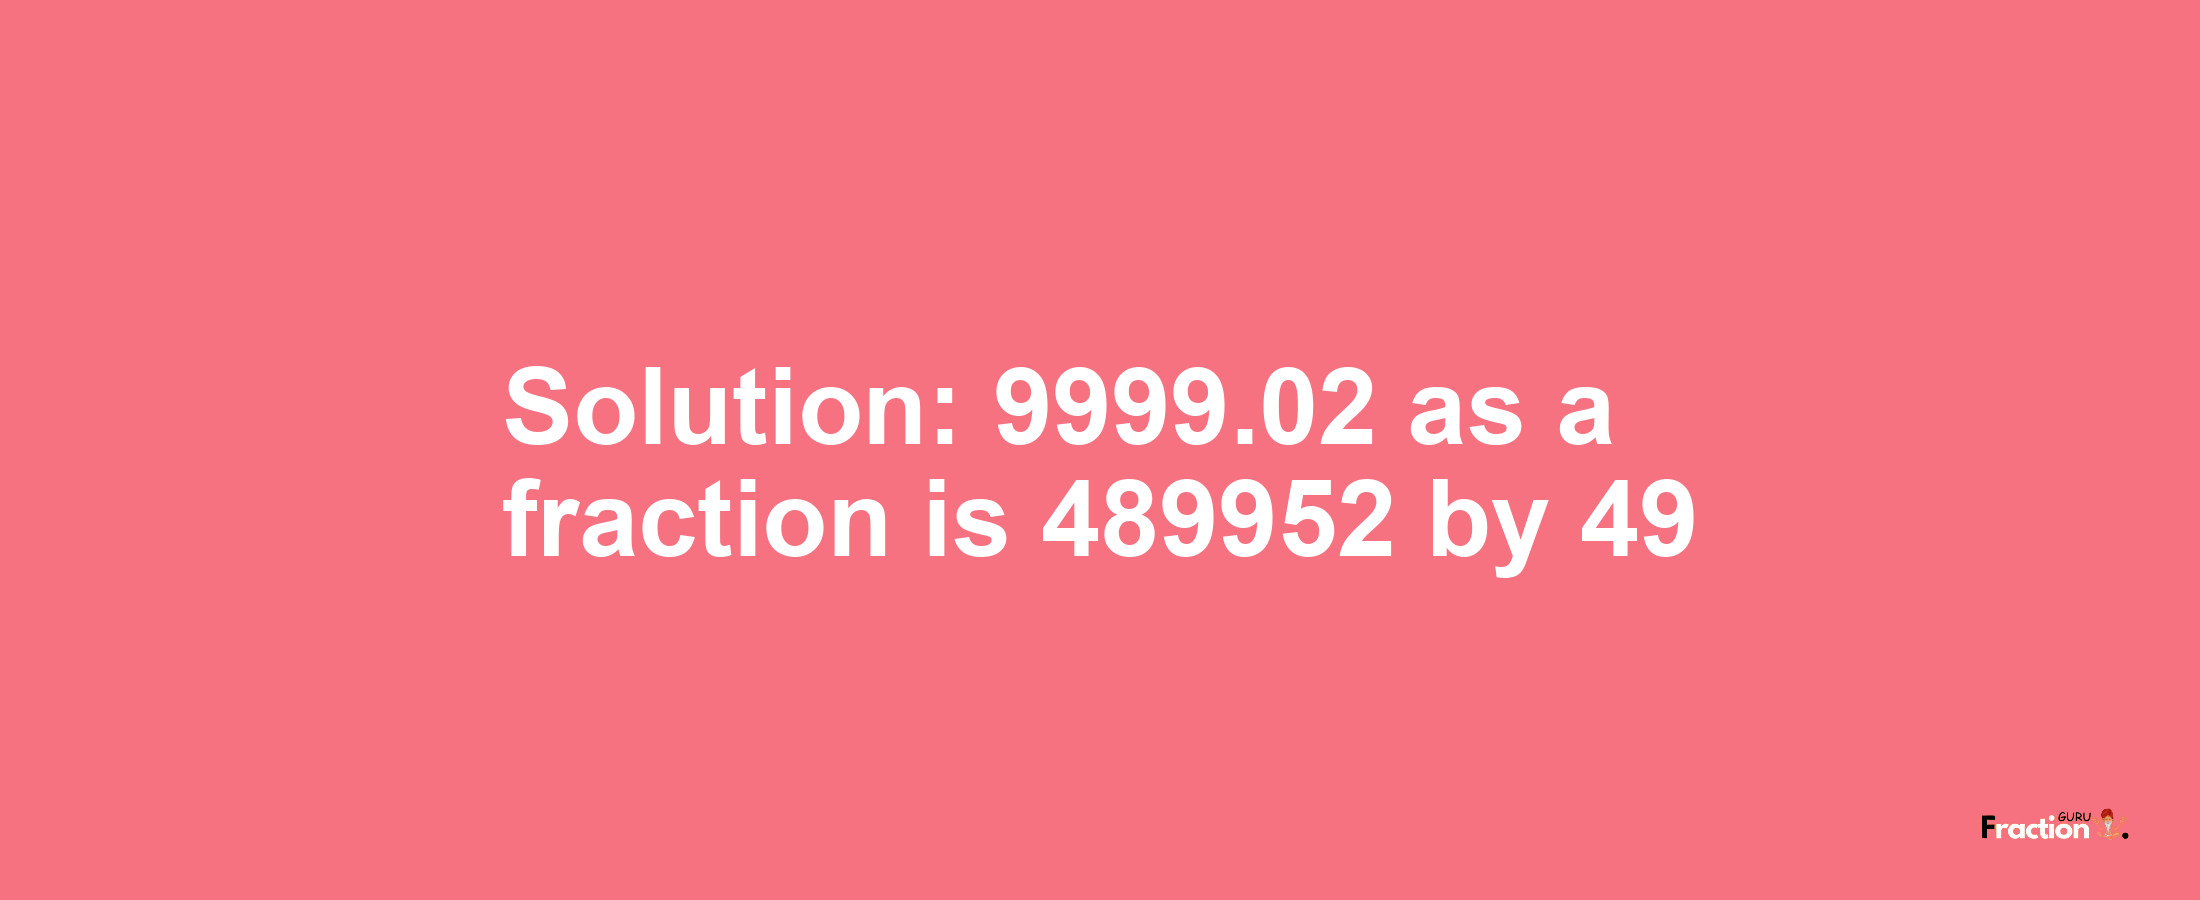 Solution:9999.02 as a fraction is 489952/49